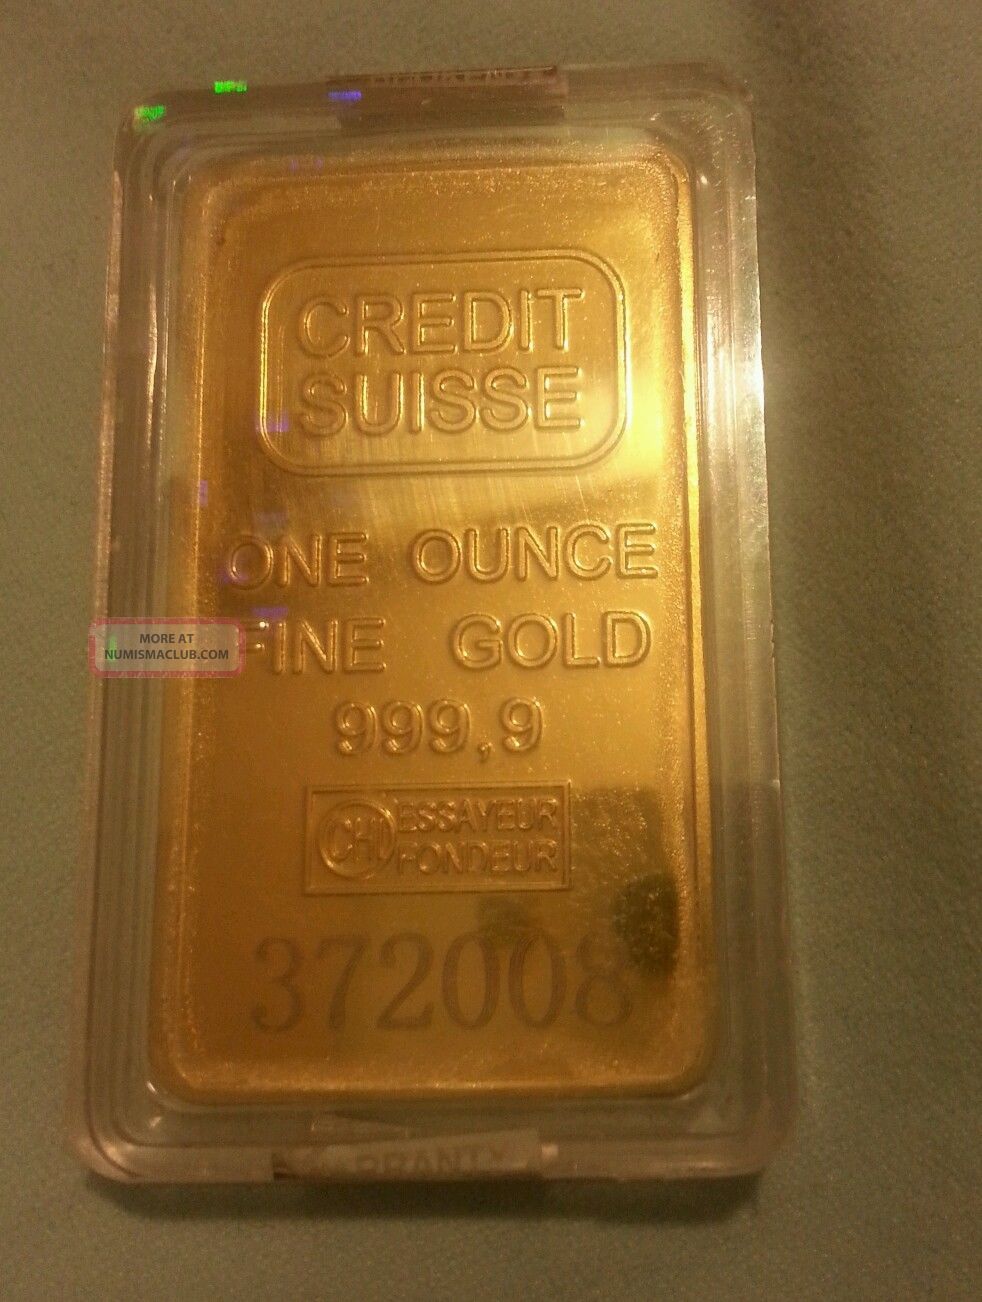 credit suisse gold bar 1 ounce